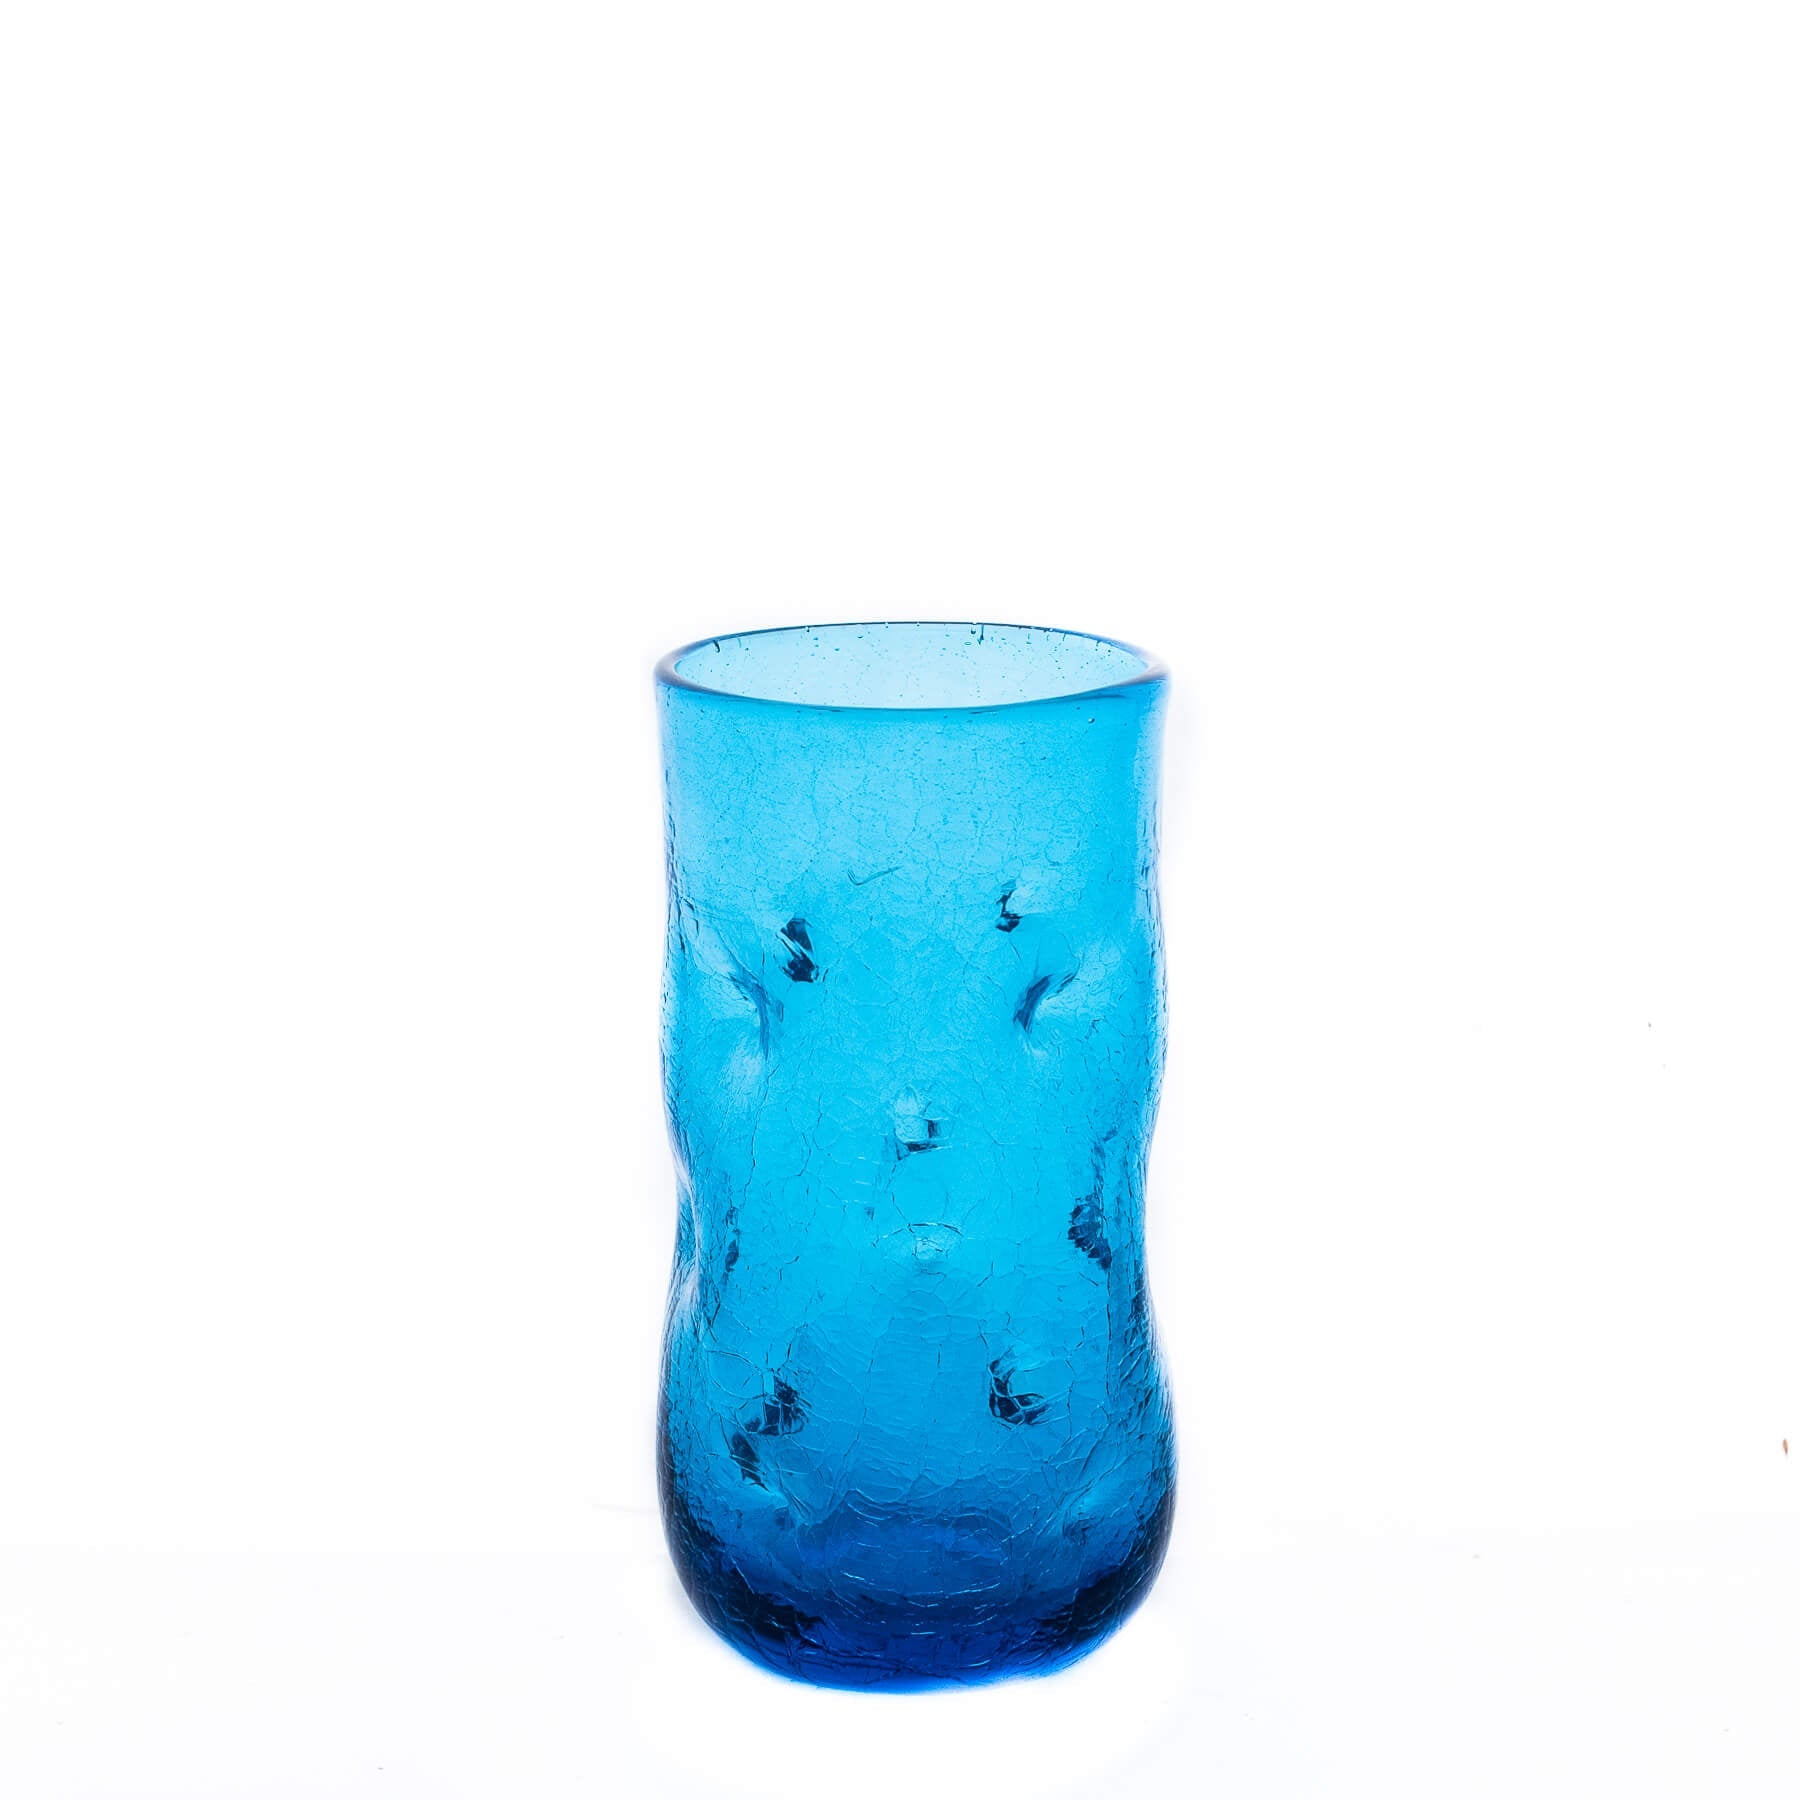 Product photo for Blenko 418LC Crackled Large Dimple Glass - Turquoise